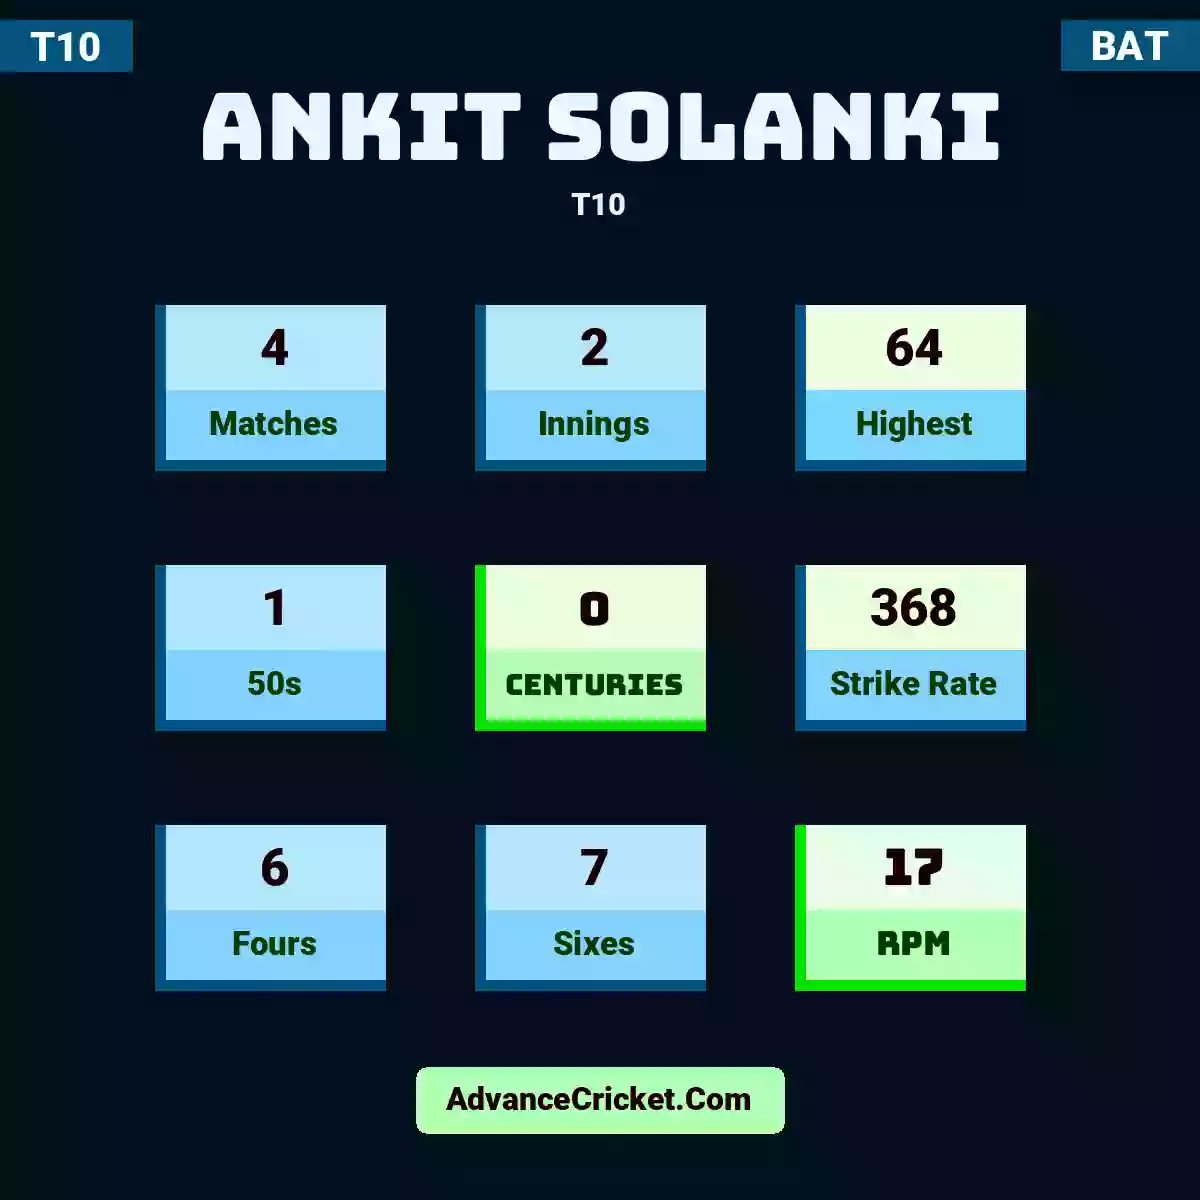 Ankit Solanki T10 , Ankit Solanki played 4 matches, scored 64 runs as highest, 1 half-centuries, and 0 centuries, with a strike rate of 368. A.Solanki hit 6 fours and 7 sixes, with an RPM of 17.